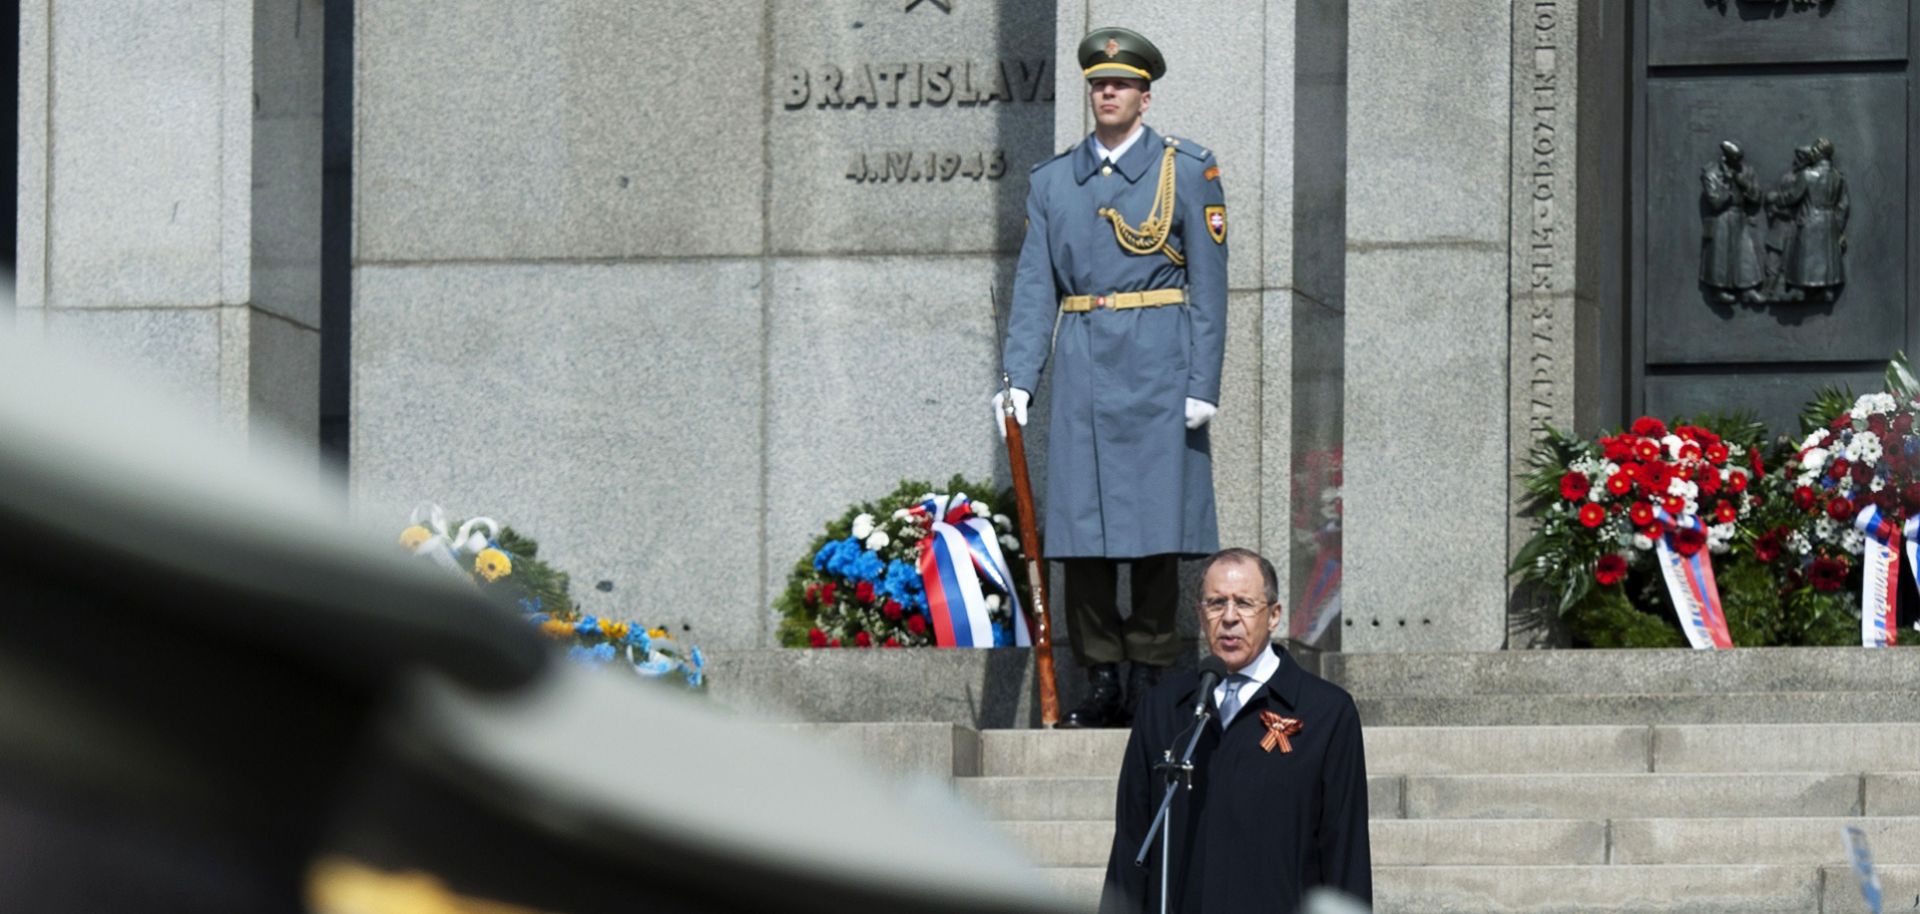 Russian Foreign Minister Sergei Lavrov speaks April 4 at the World War II memorial in Bratislava during a ceremony celebrating the 70th anniversary of the Red Army's liberation of Bratislava from the Nazis.